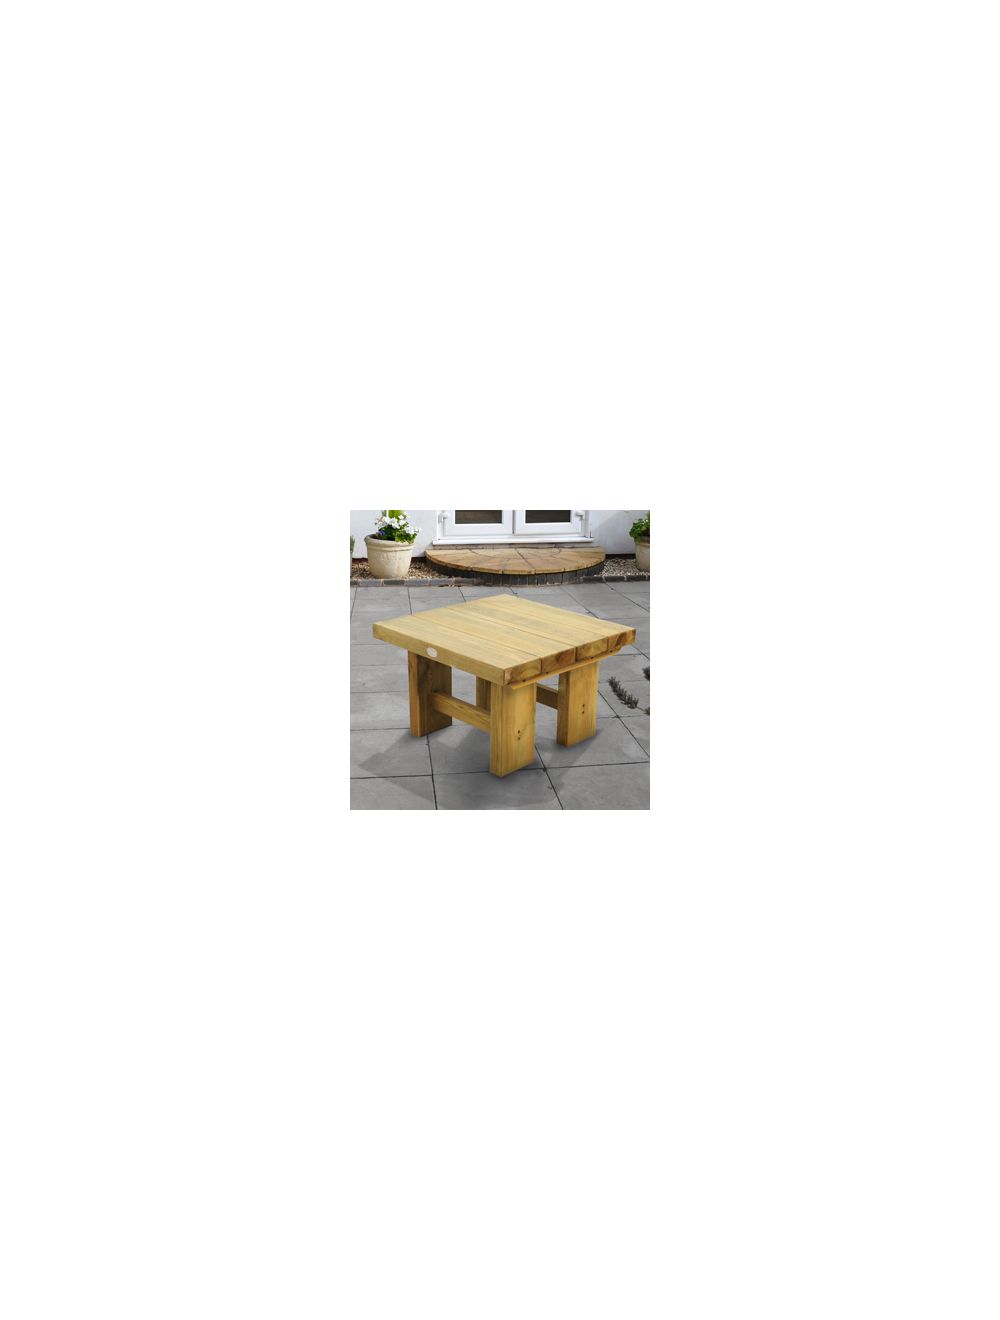 Forest Garden Forest Low Level Sleeper Table 0.7m Pressure Treated